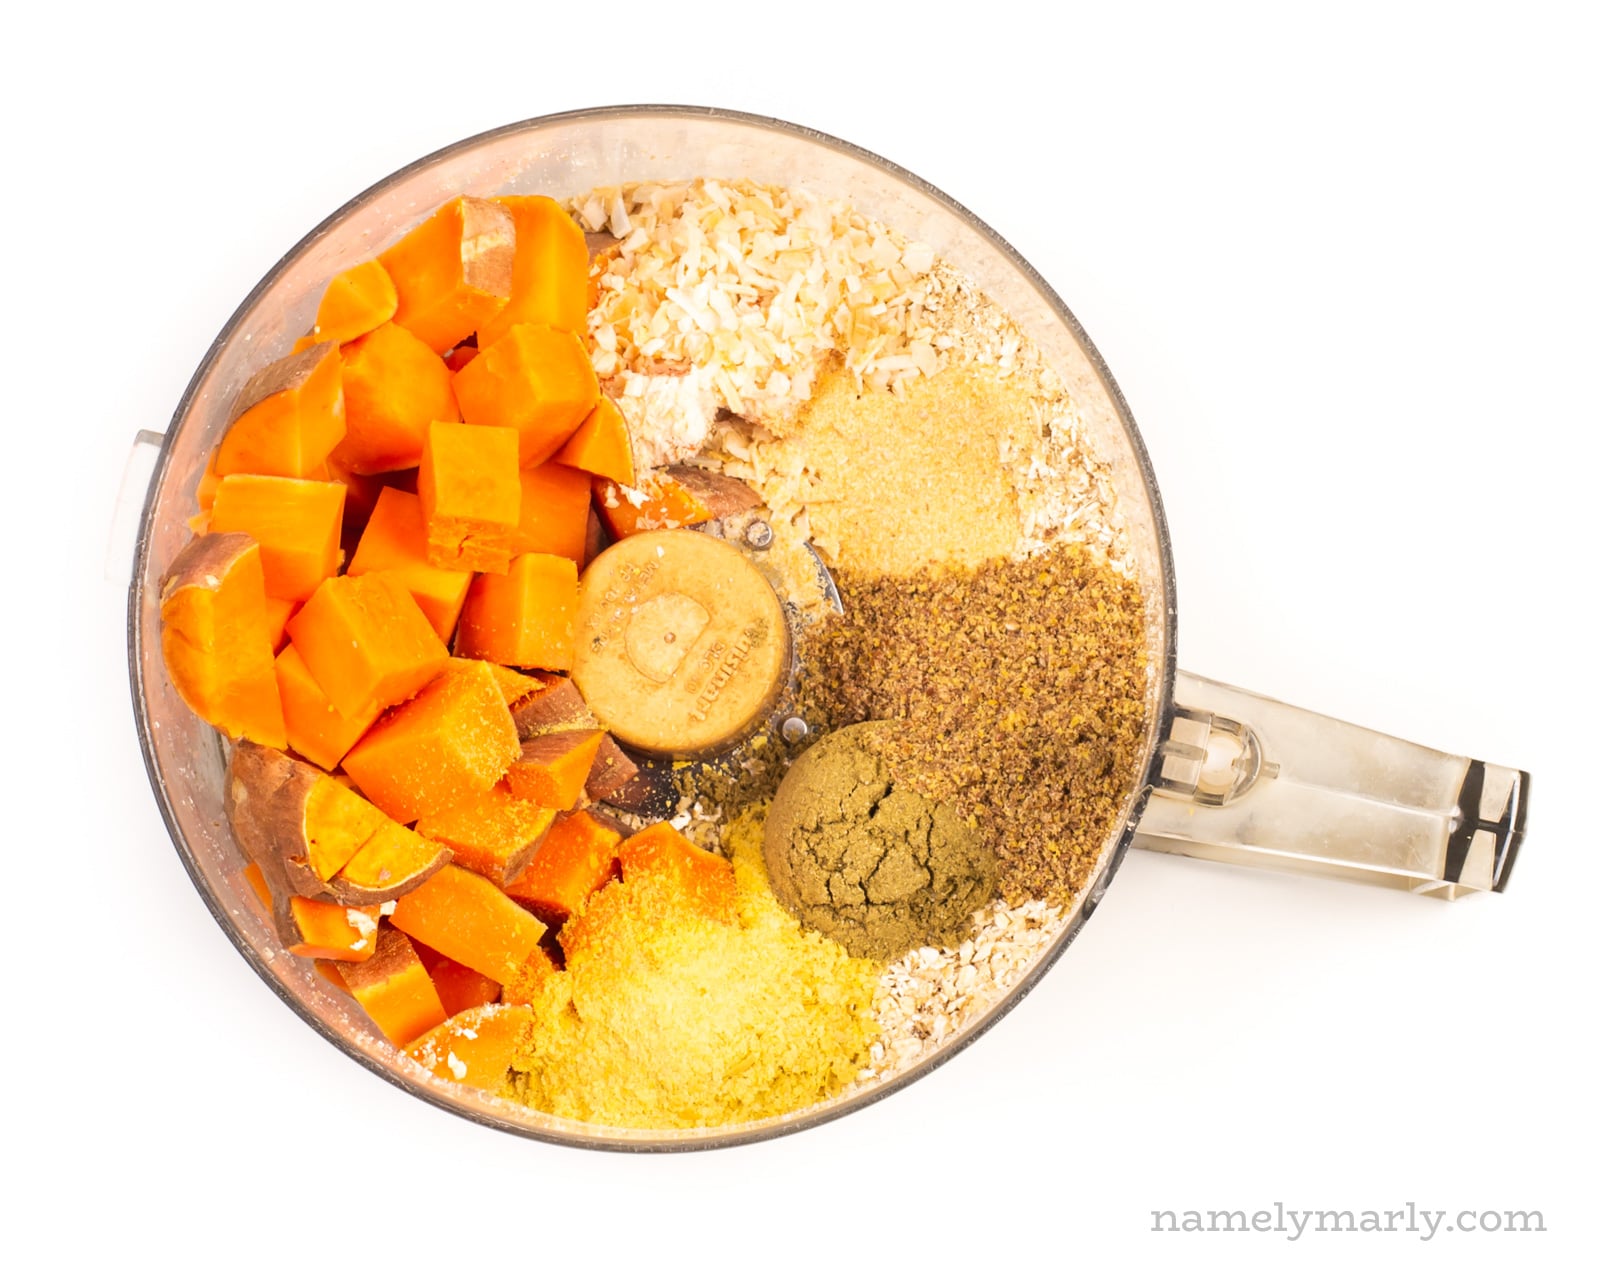 Ingredients like sweet potatoes and ground flax seeds are in a food processor bowl.